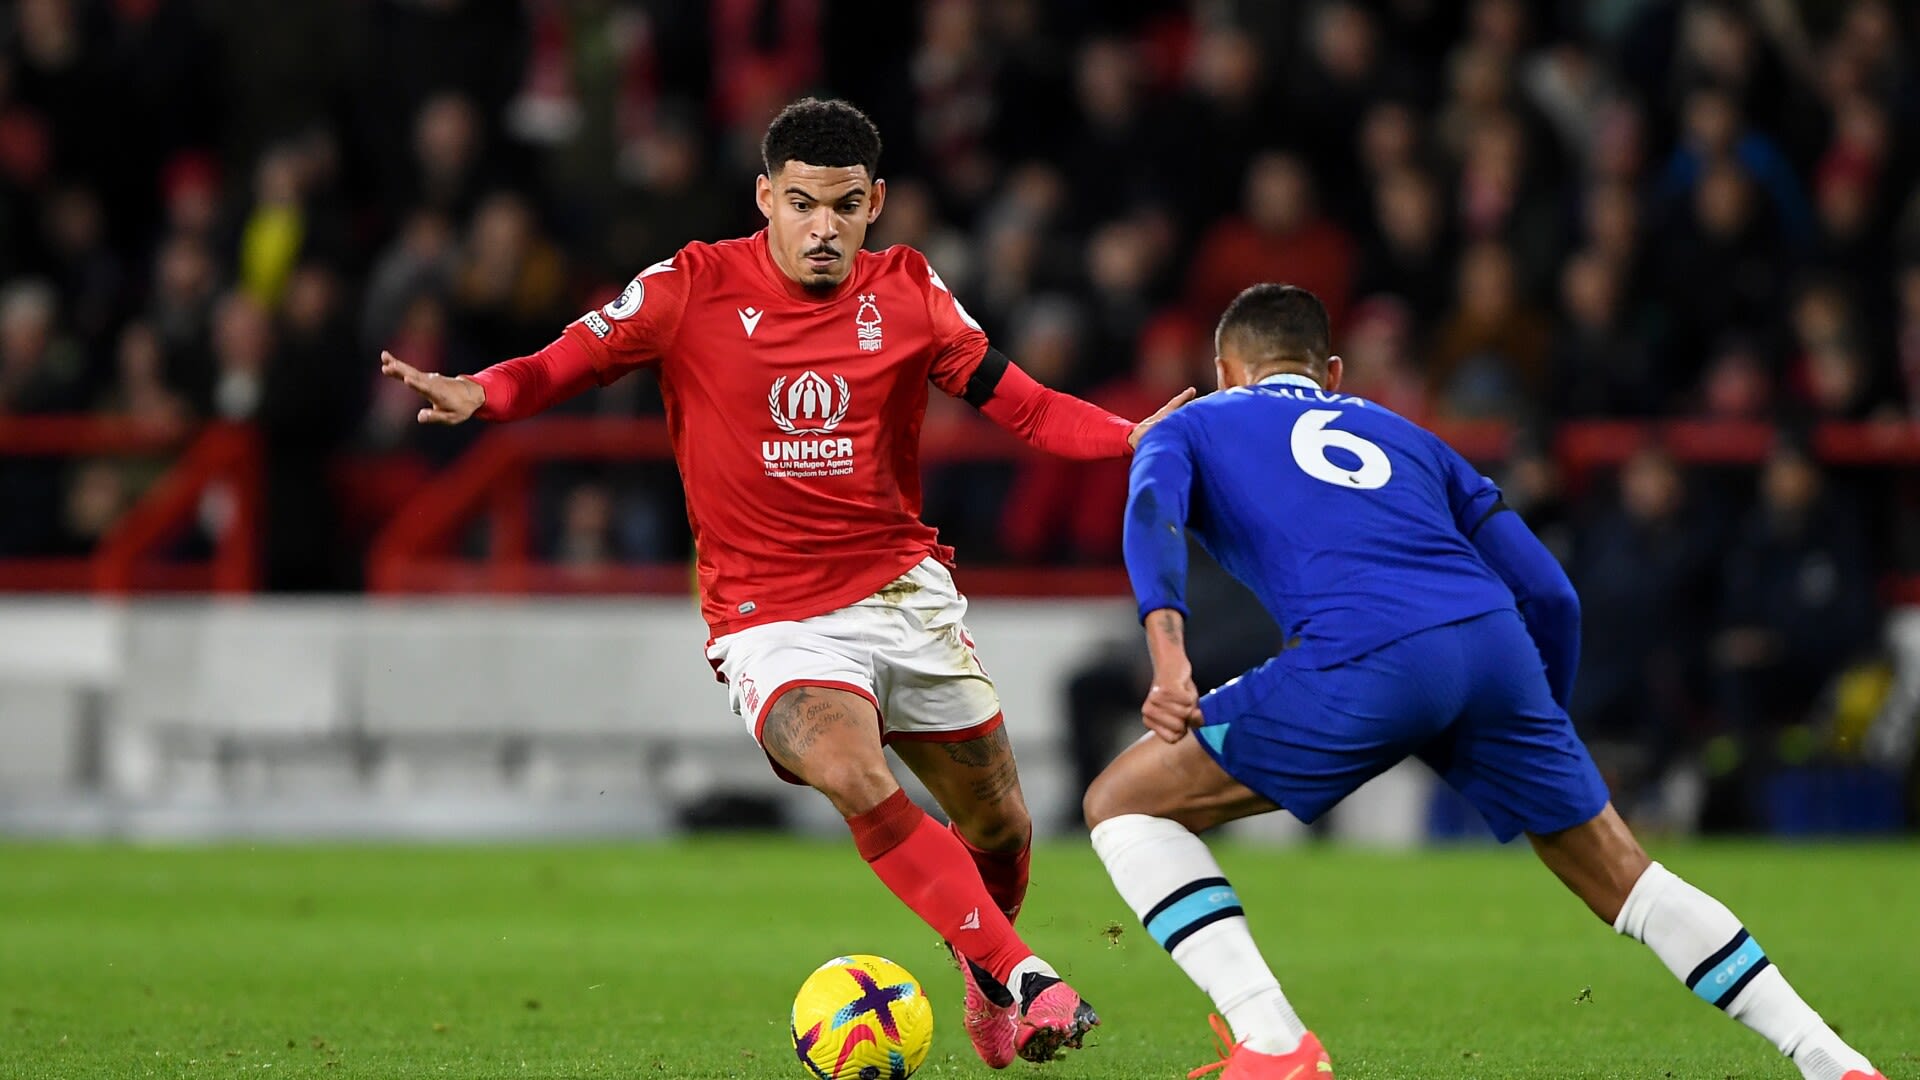 Nottingham Forest vs Chelsea: How to watch live, stream link, team news